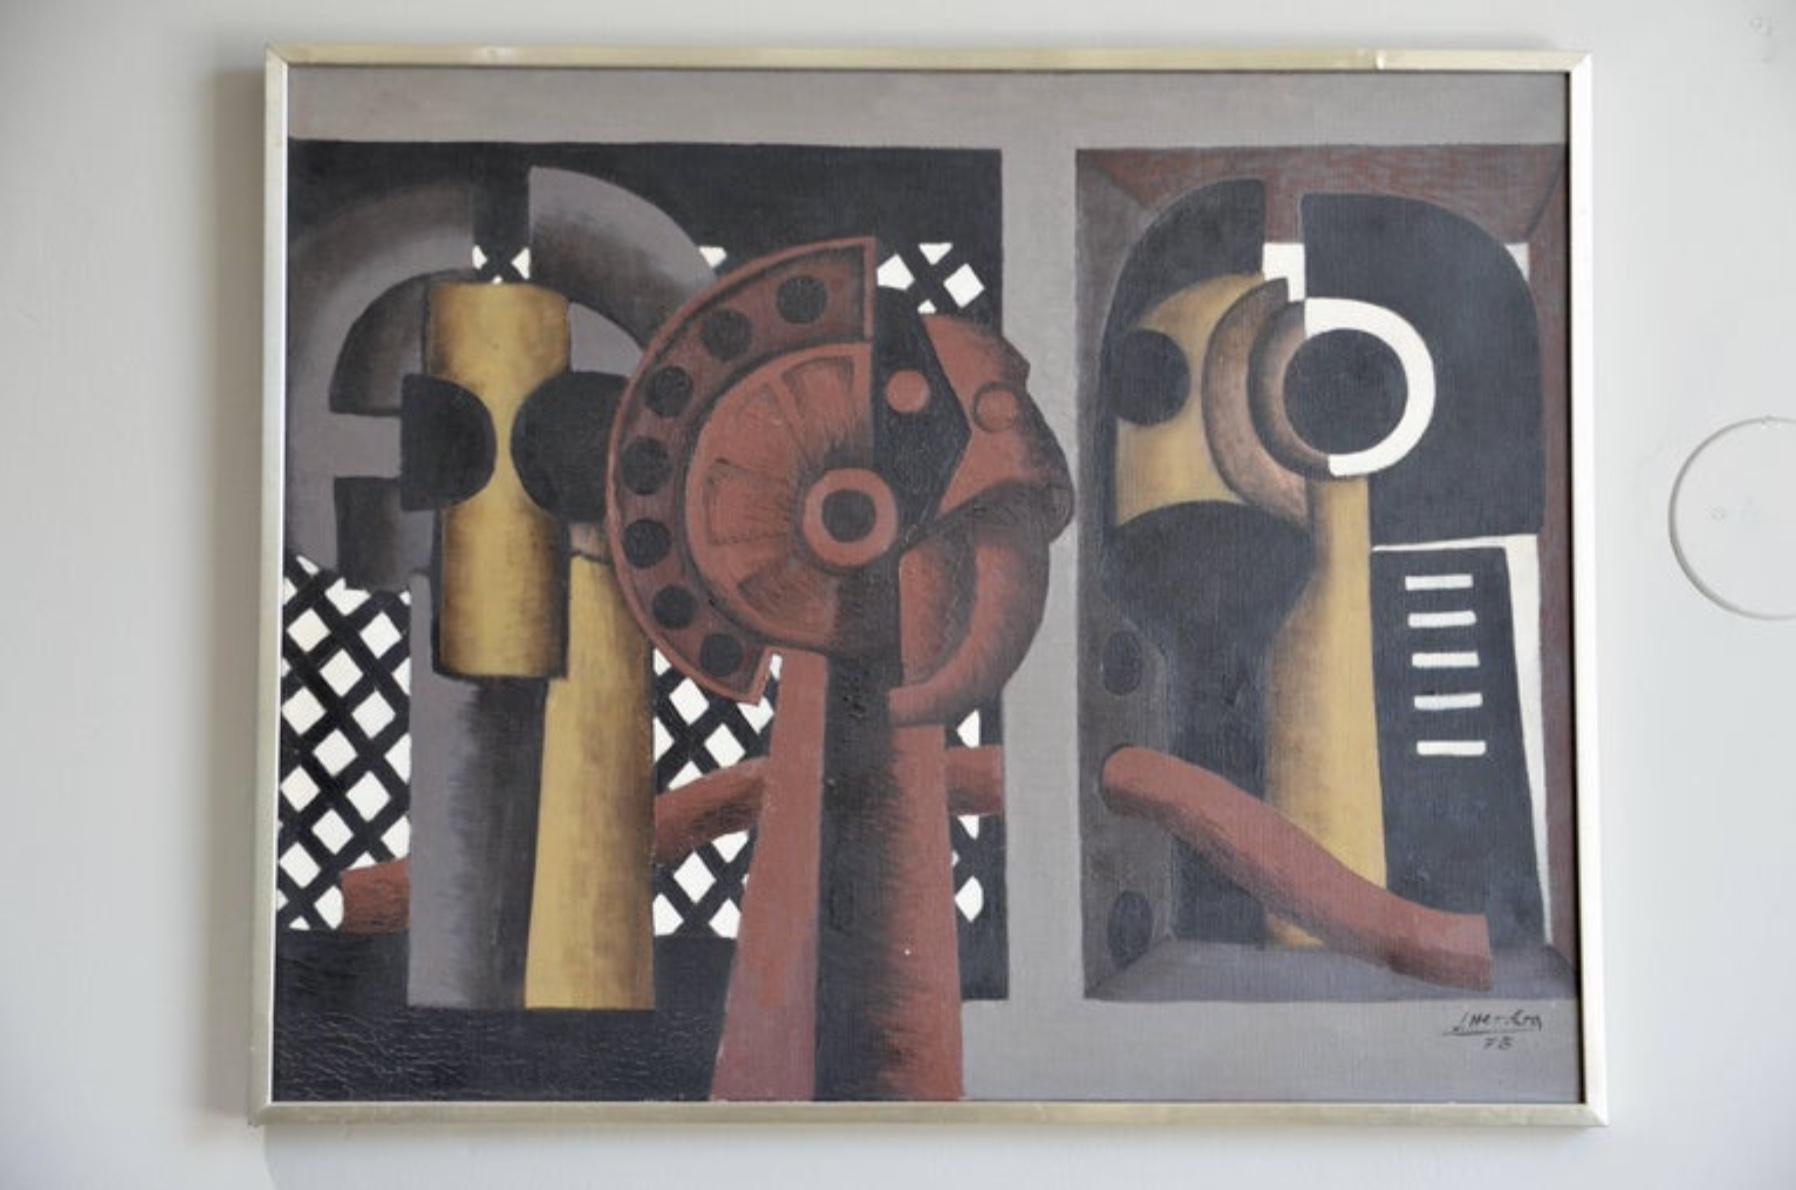 Oil on canvas by José Herrera (Spanish, 1943-).

Signed and dated 1973.

Original stainless steel frame.

A beautiful piece.